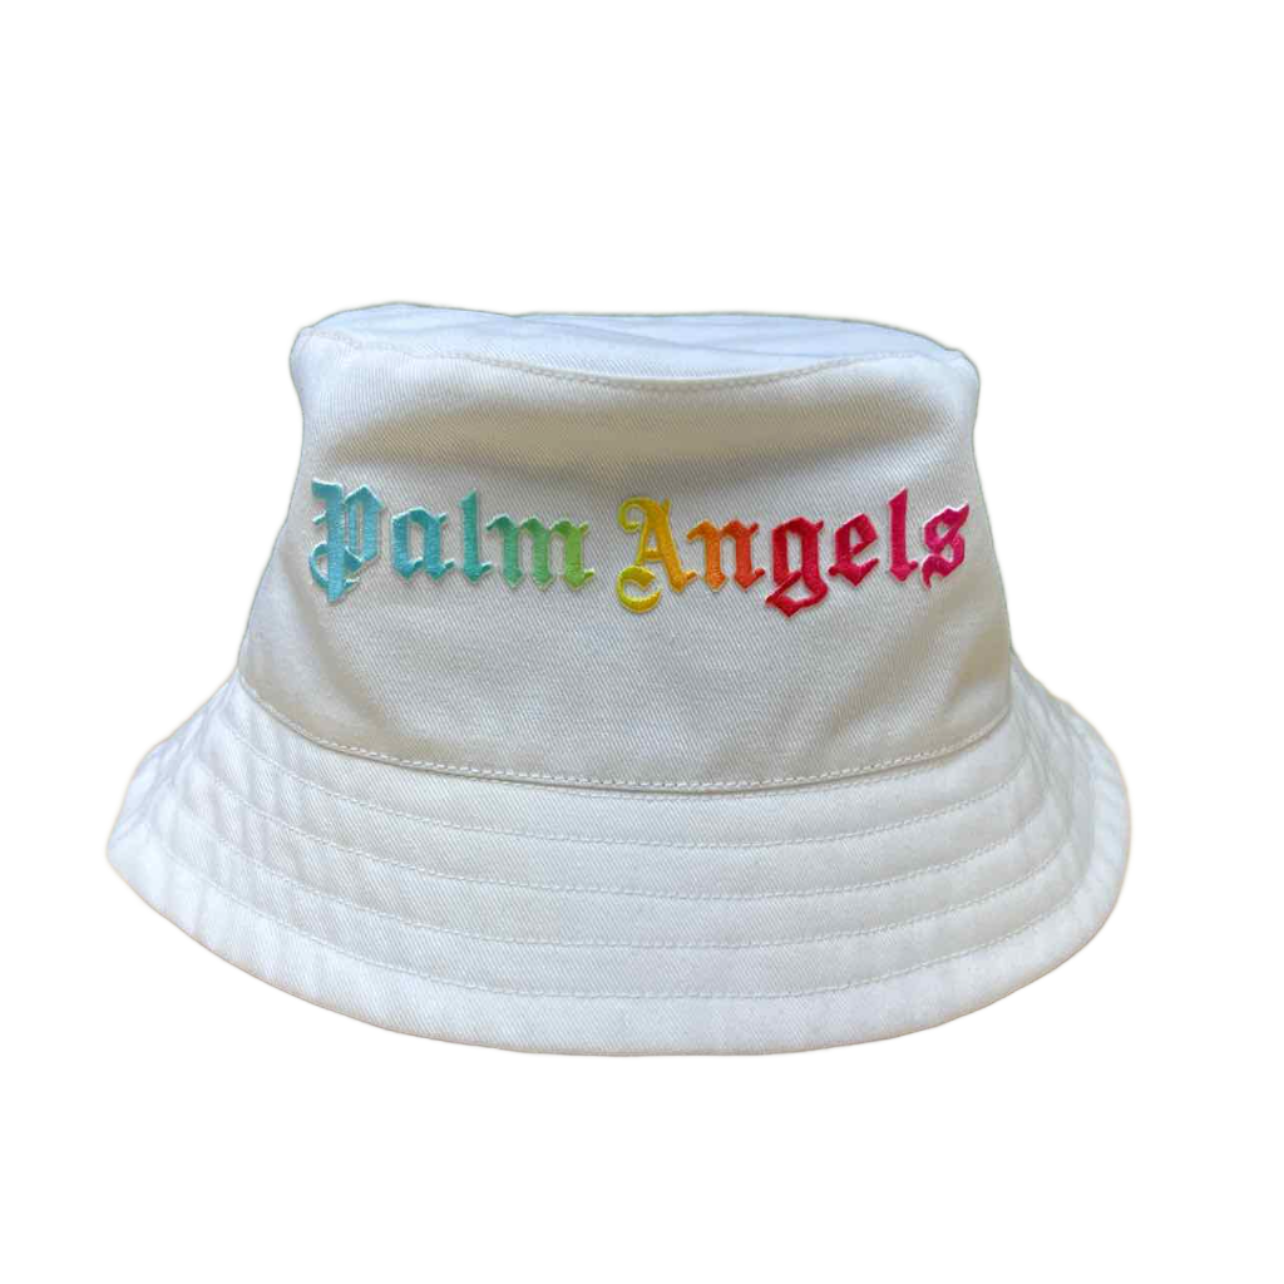 Palm Angels Bucket Hat &quot;RACER BLUE&quot; Cream New Size OS